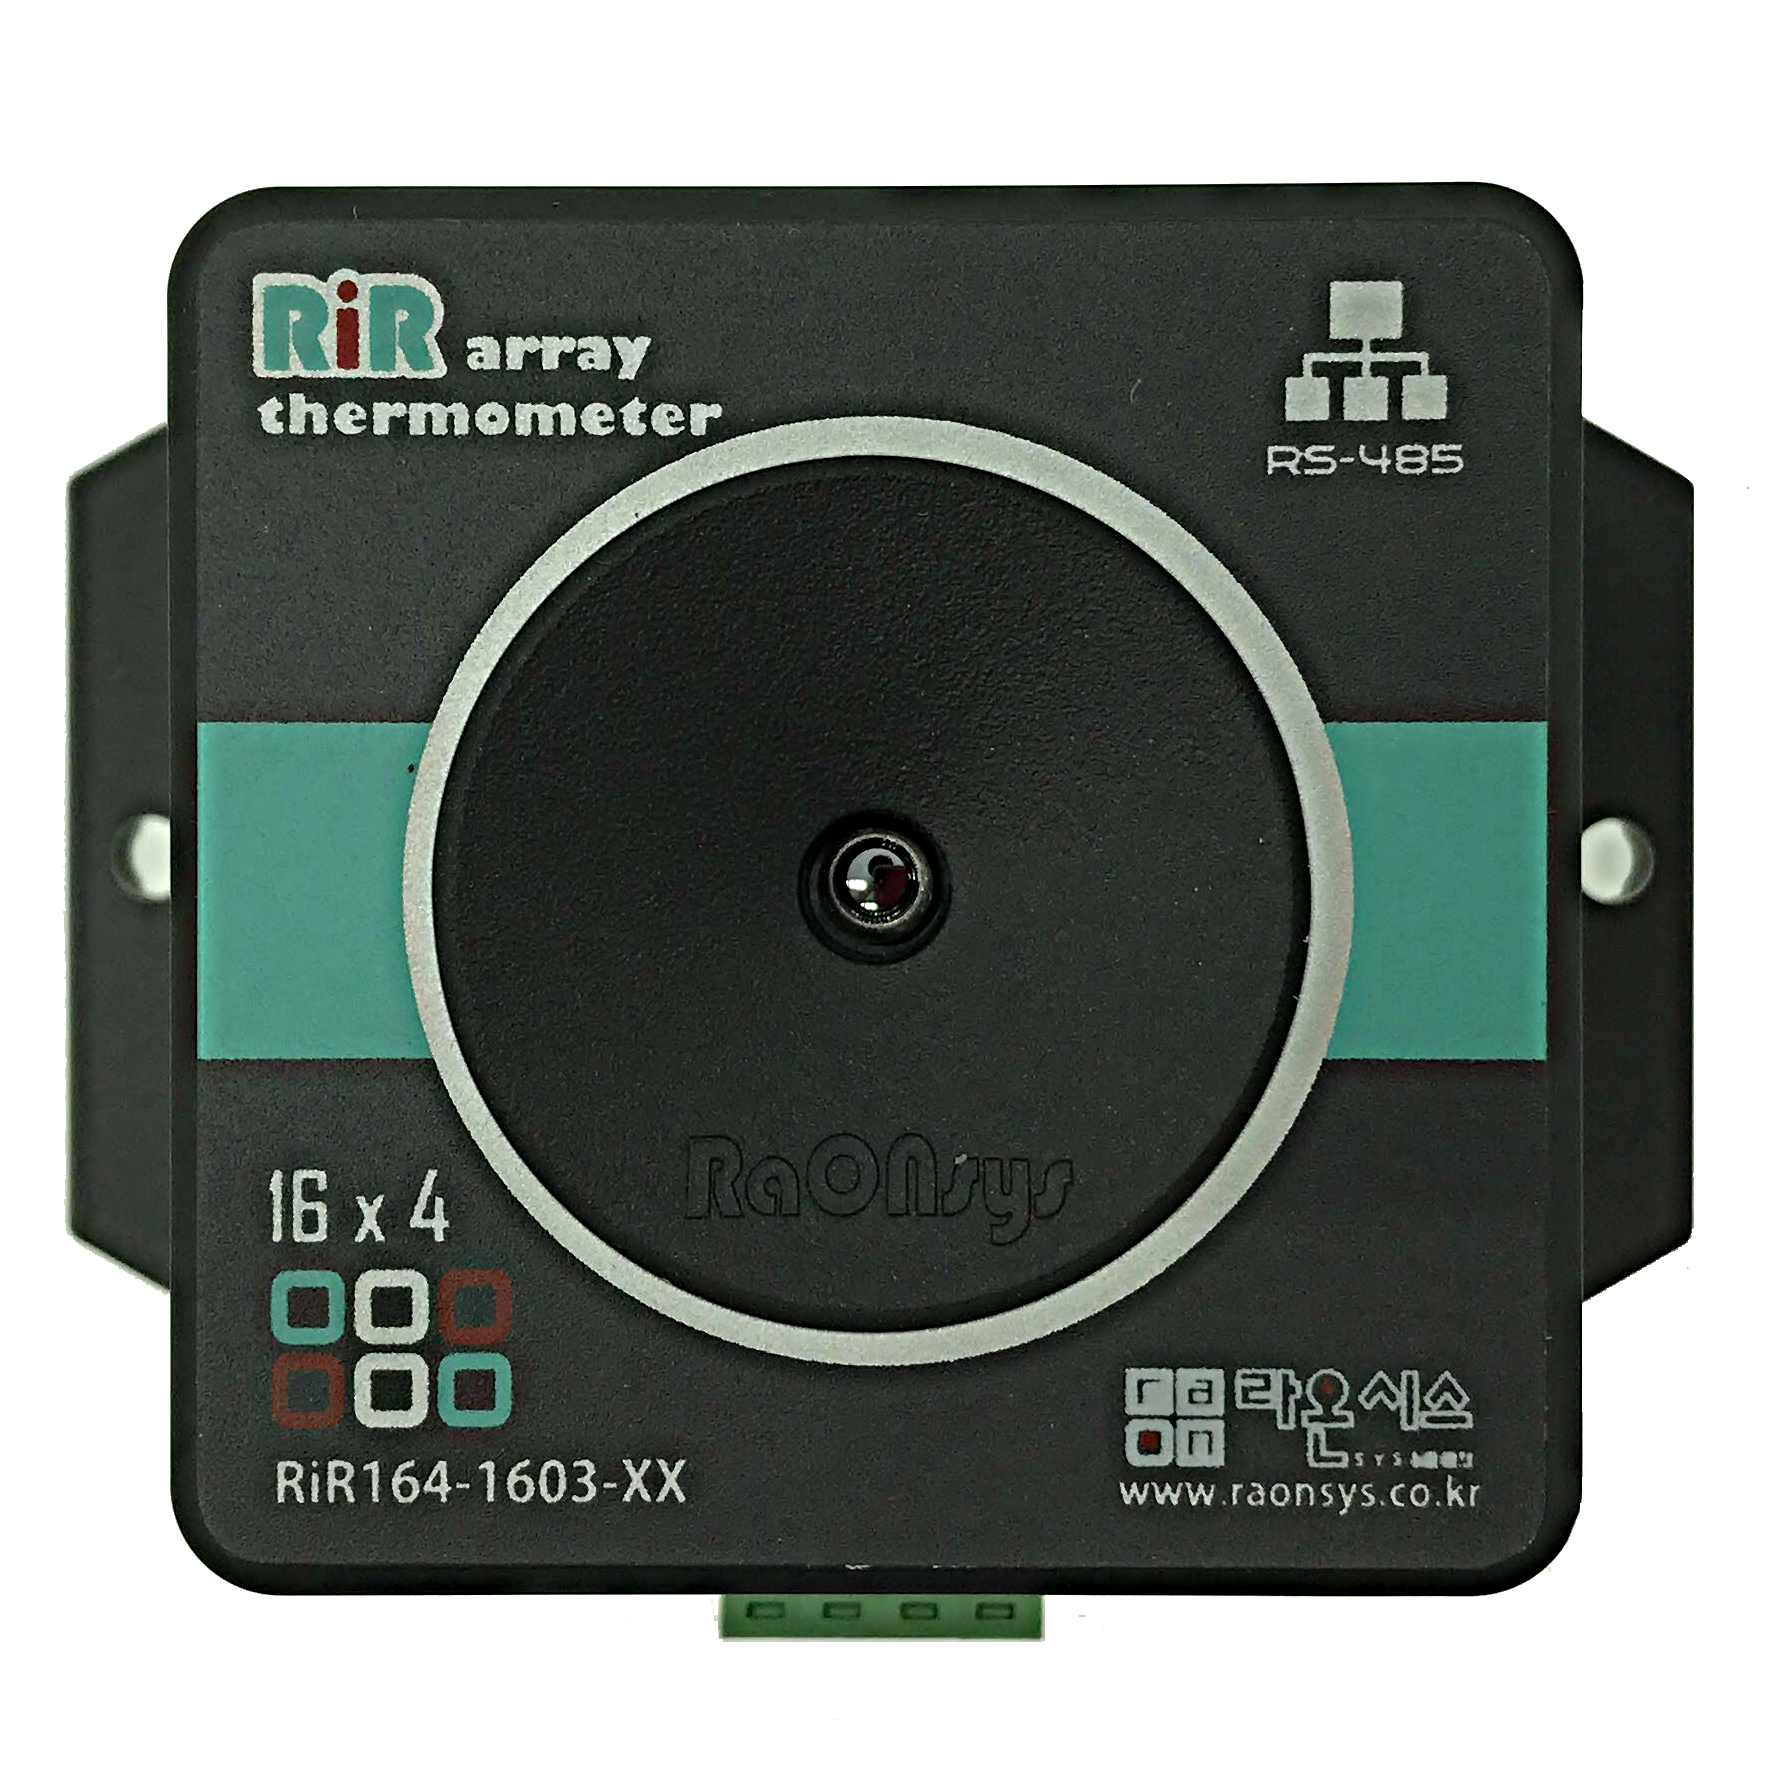 RiR array thermometer